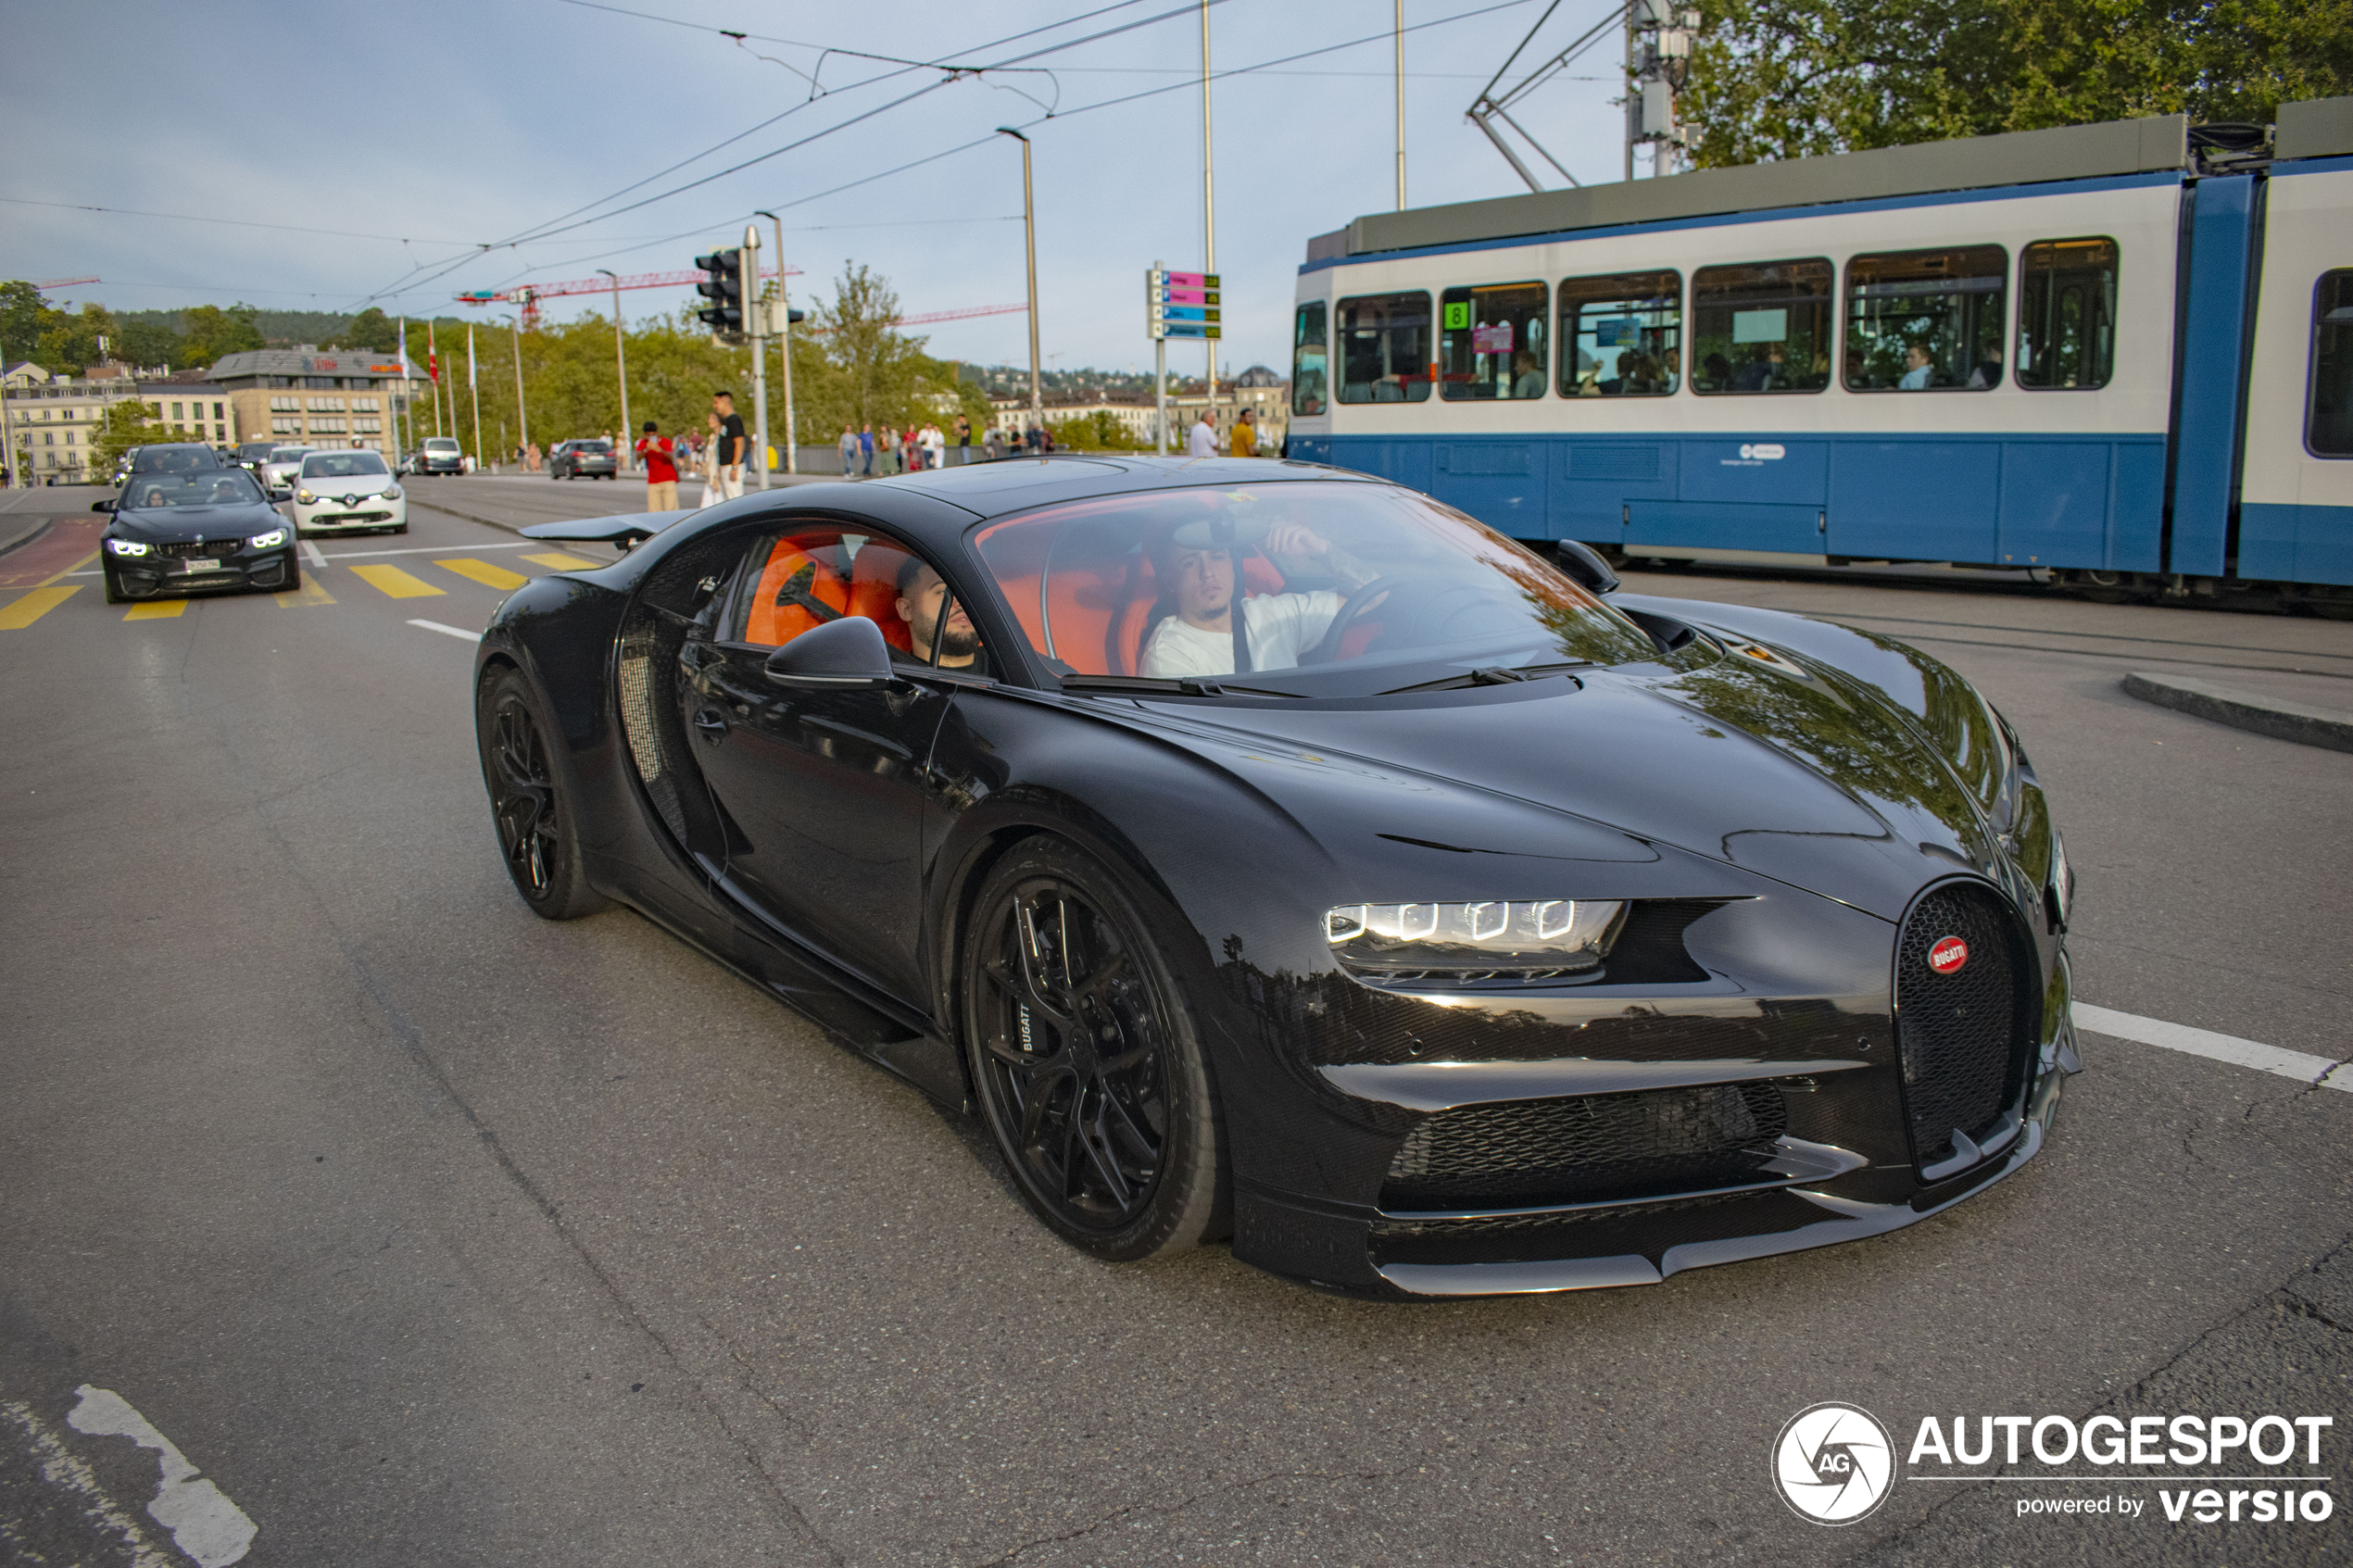 A Chiron Sport shows up in Zürich